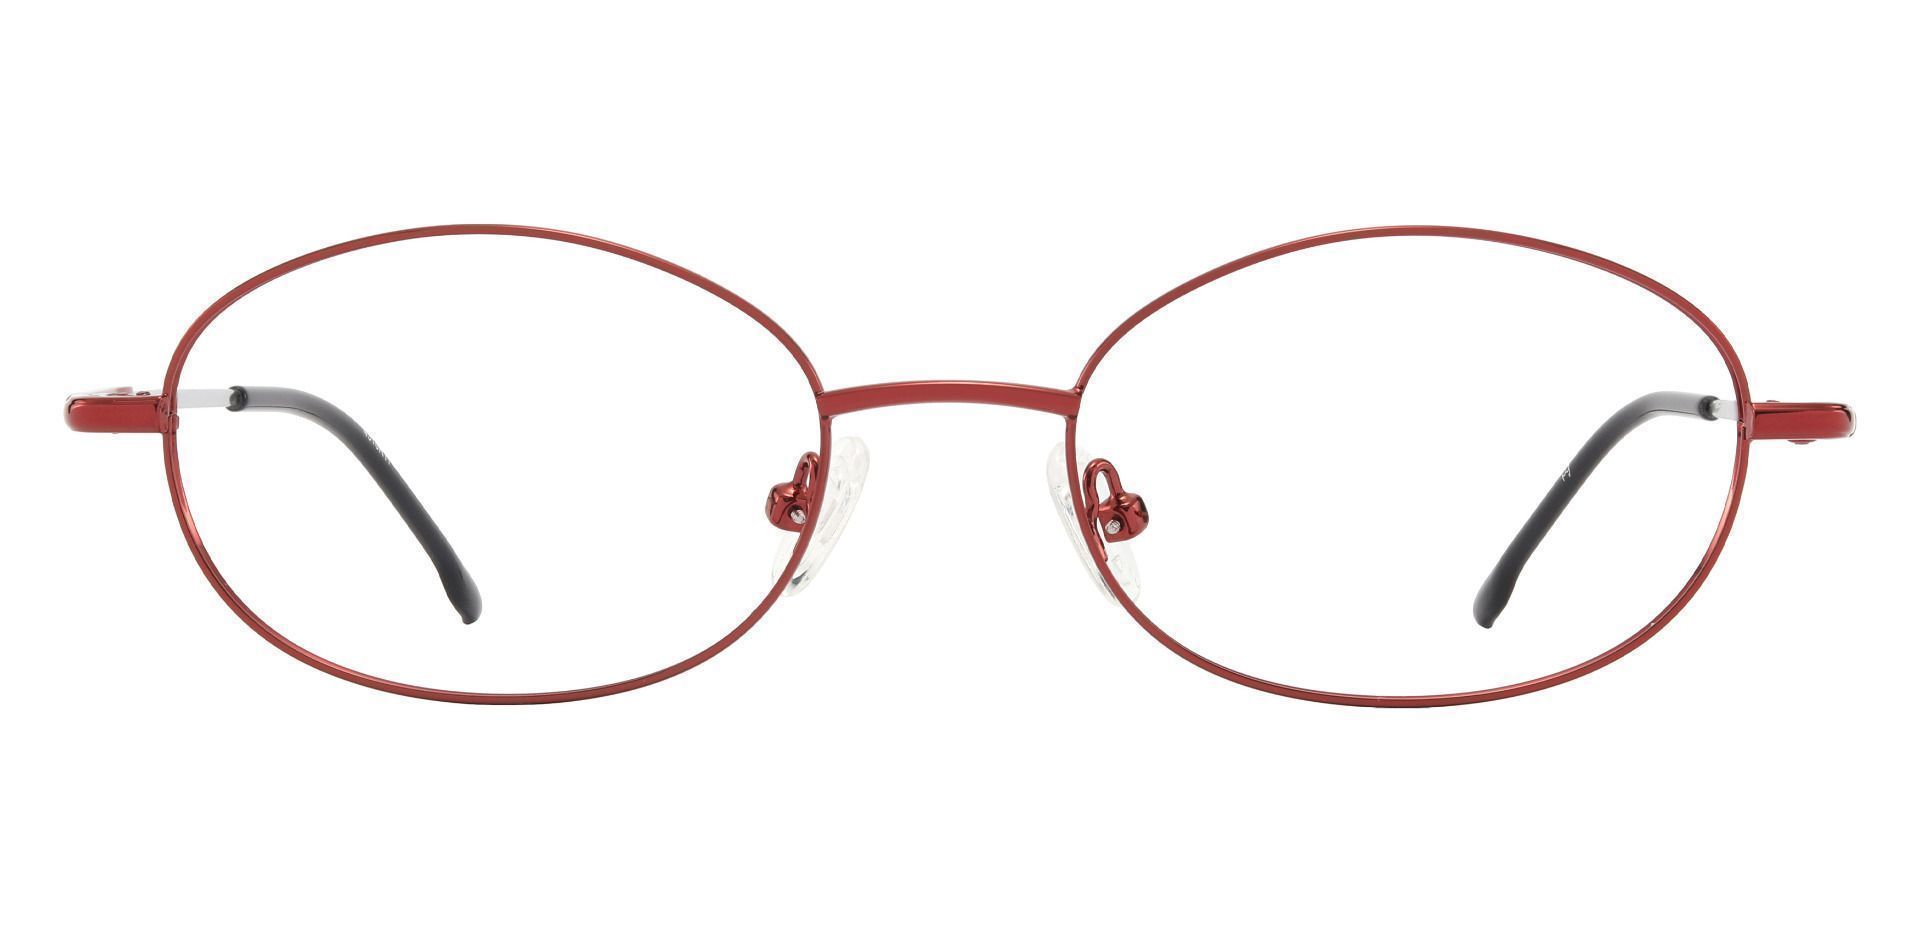 Calera Oval Reading Glasses - Red